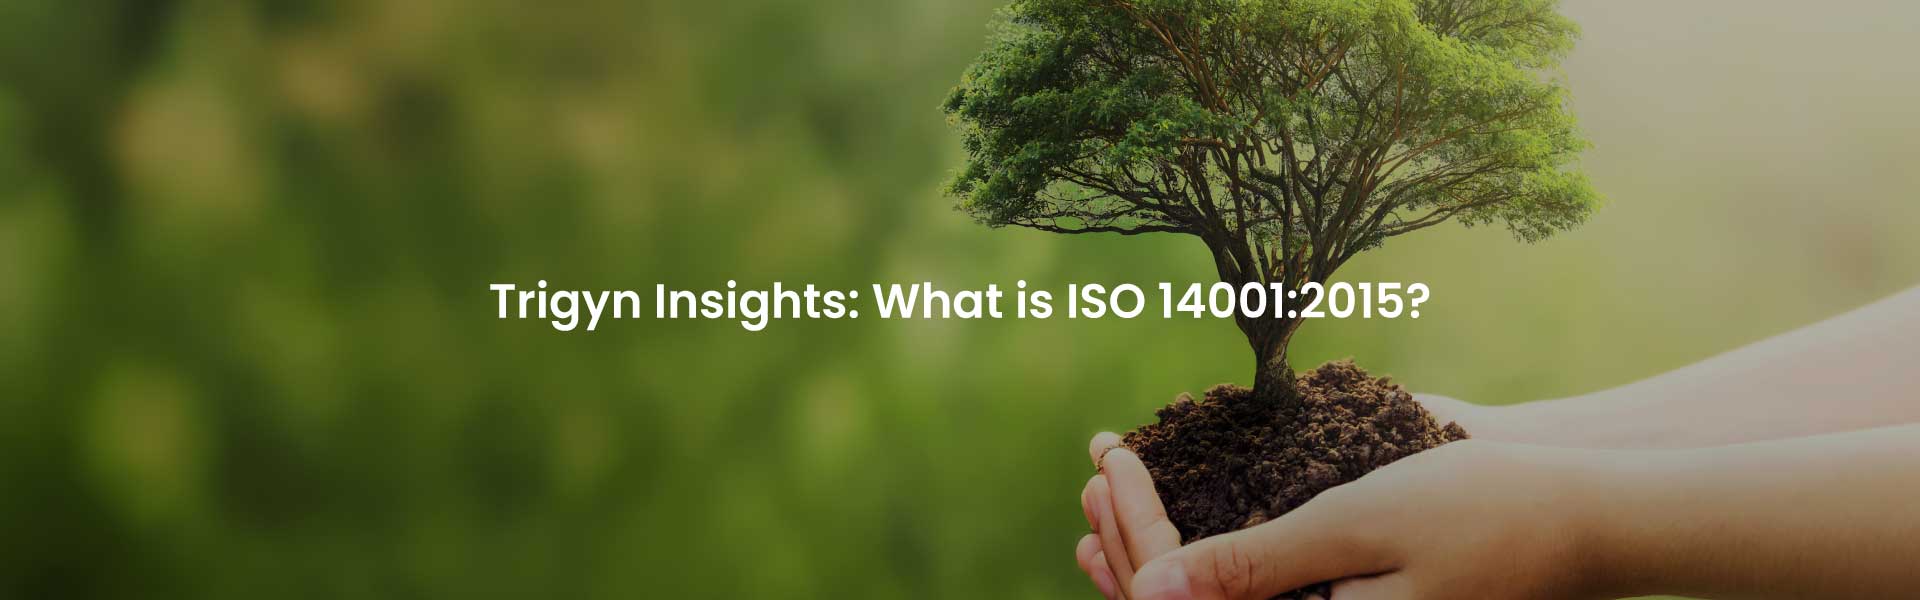 What is ISO 14001:2015